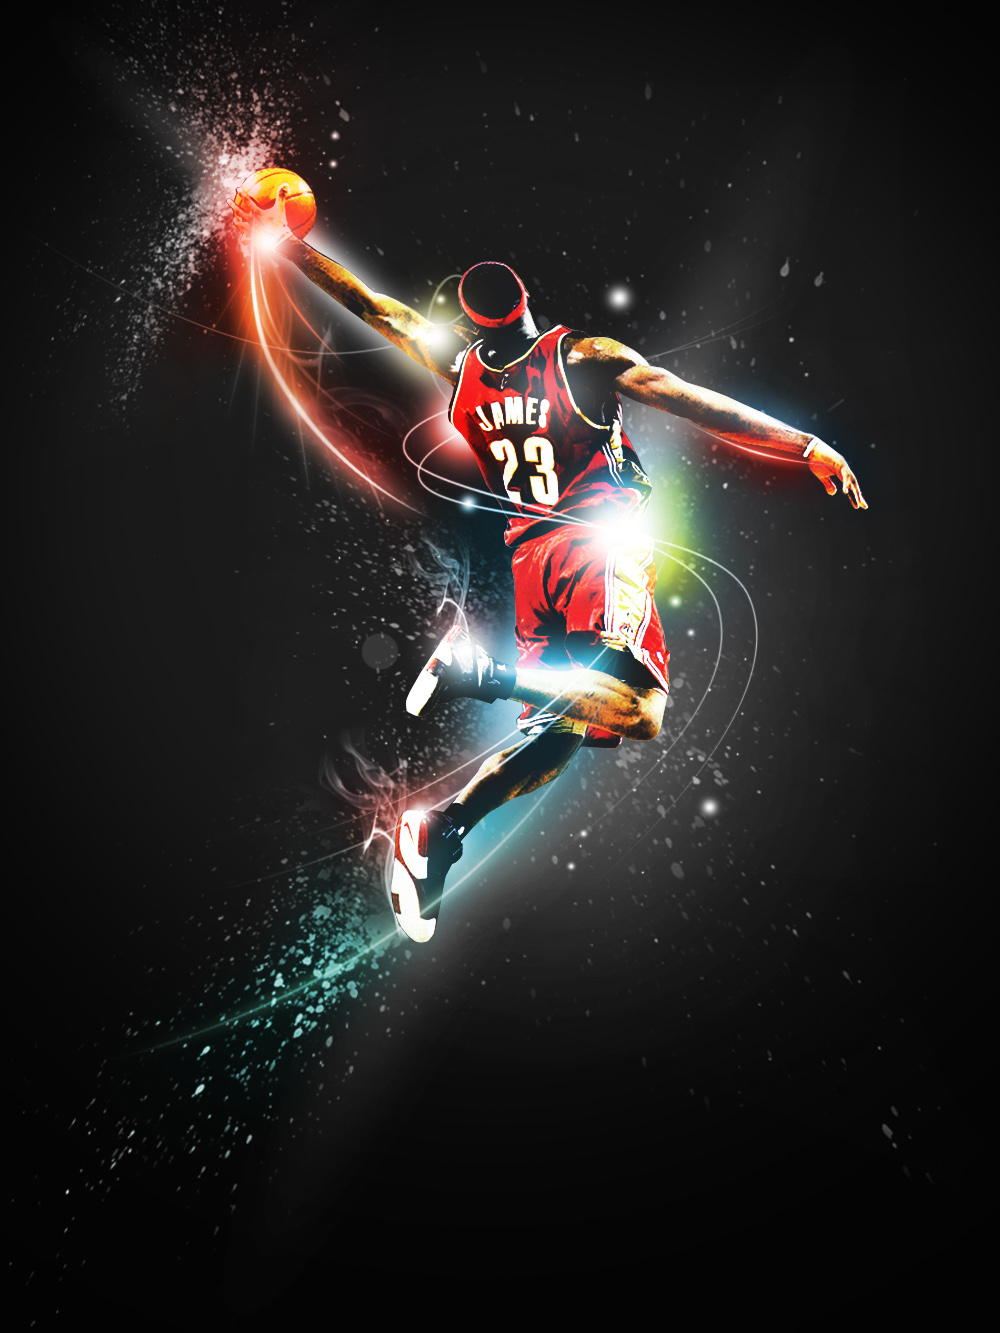 LeBron LeBron James basketball sports NBA Cleveland cavaliers ohio leap king colors colorful flow action DUNK jump